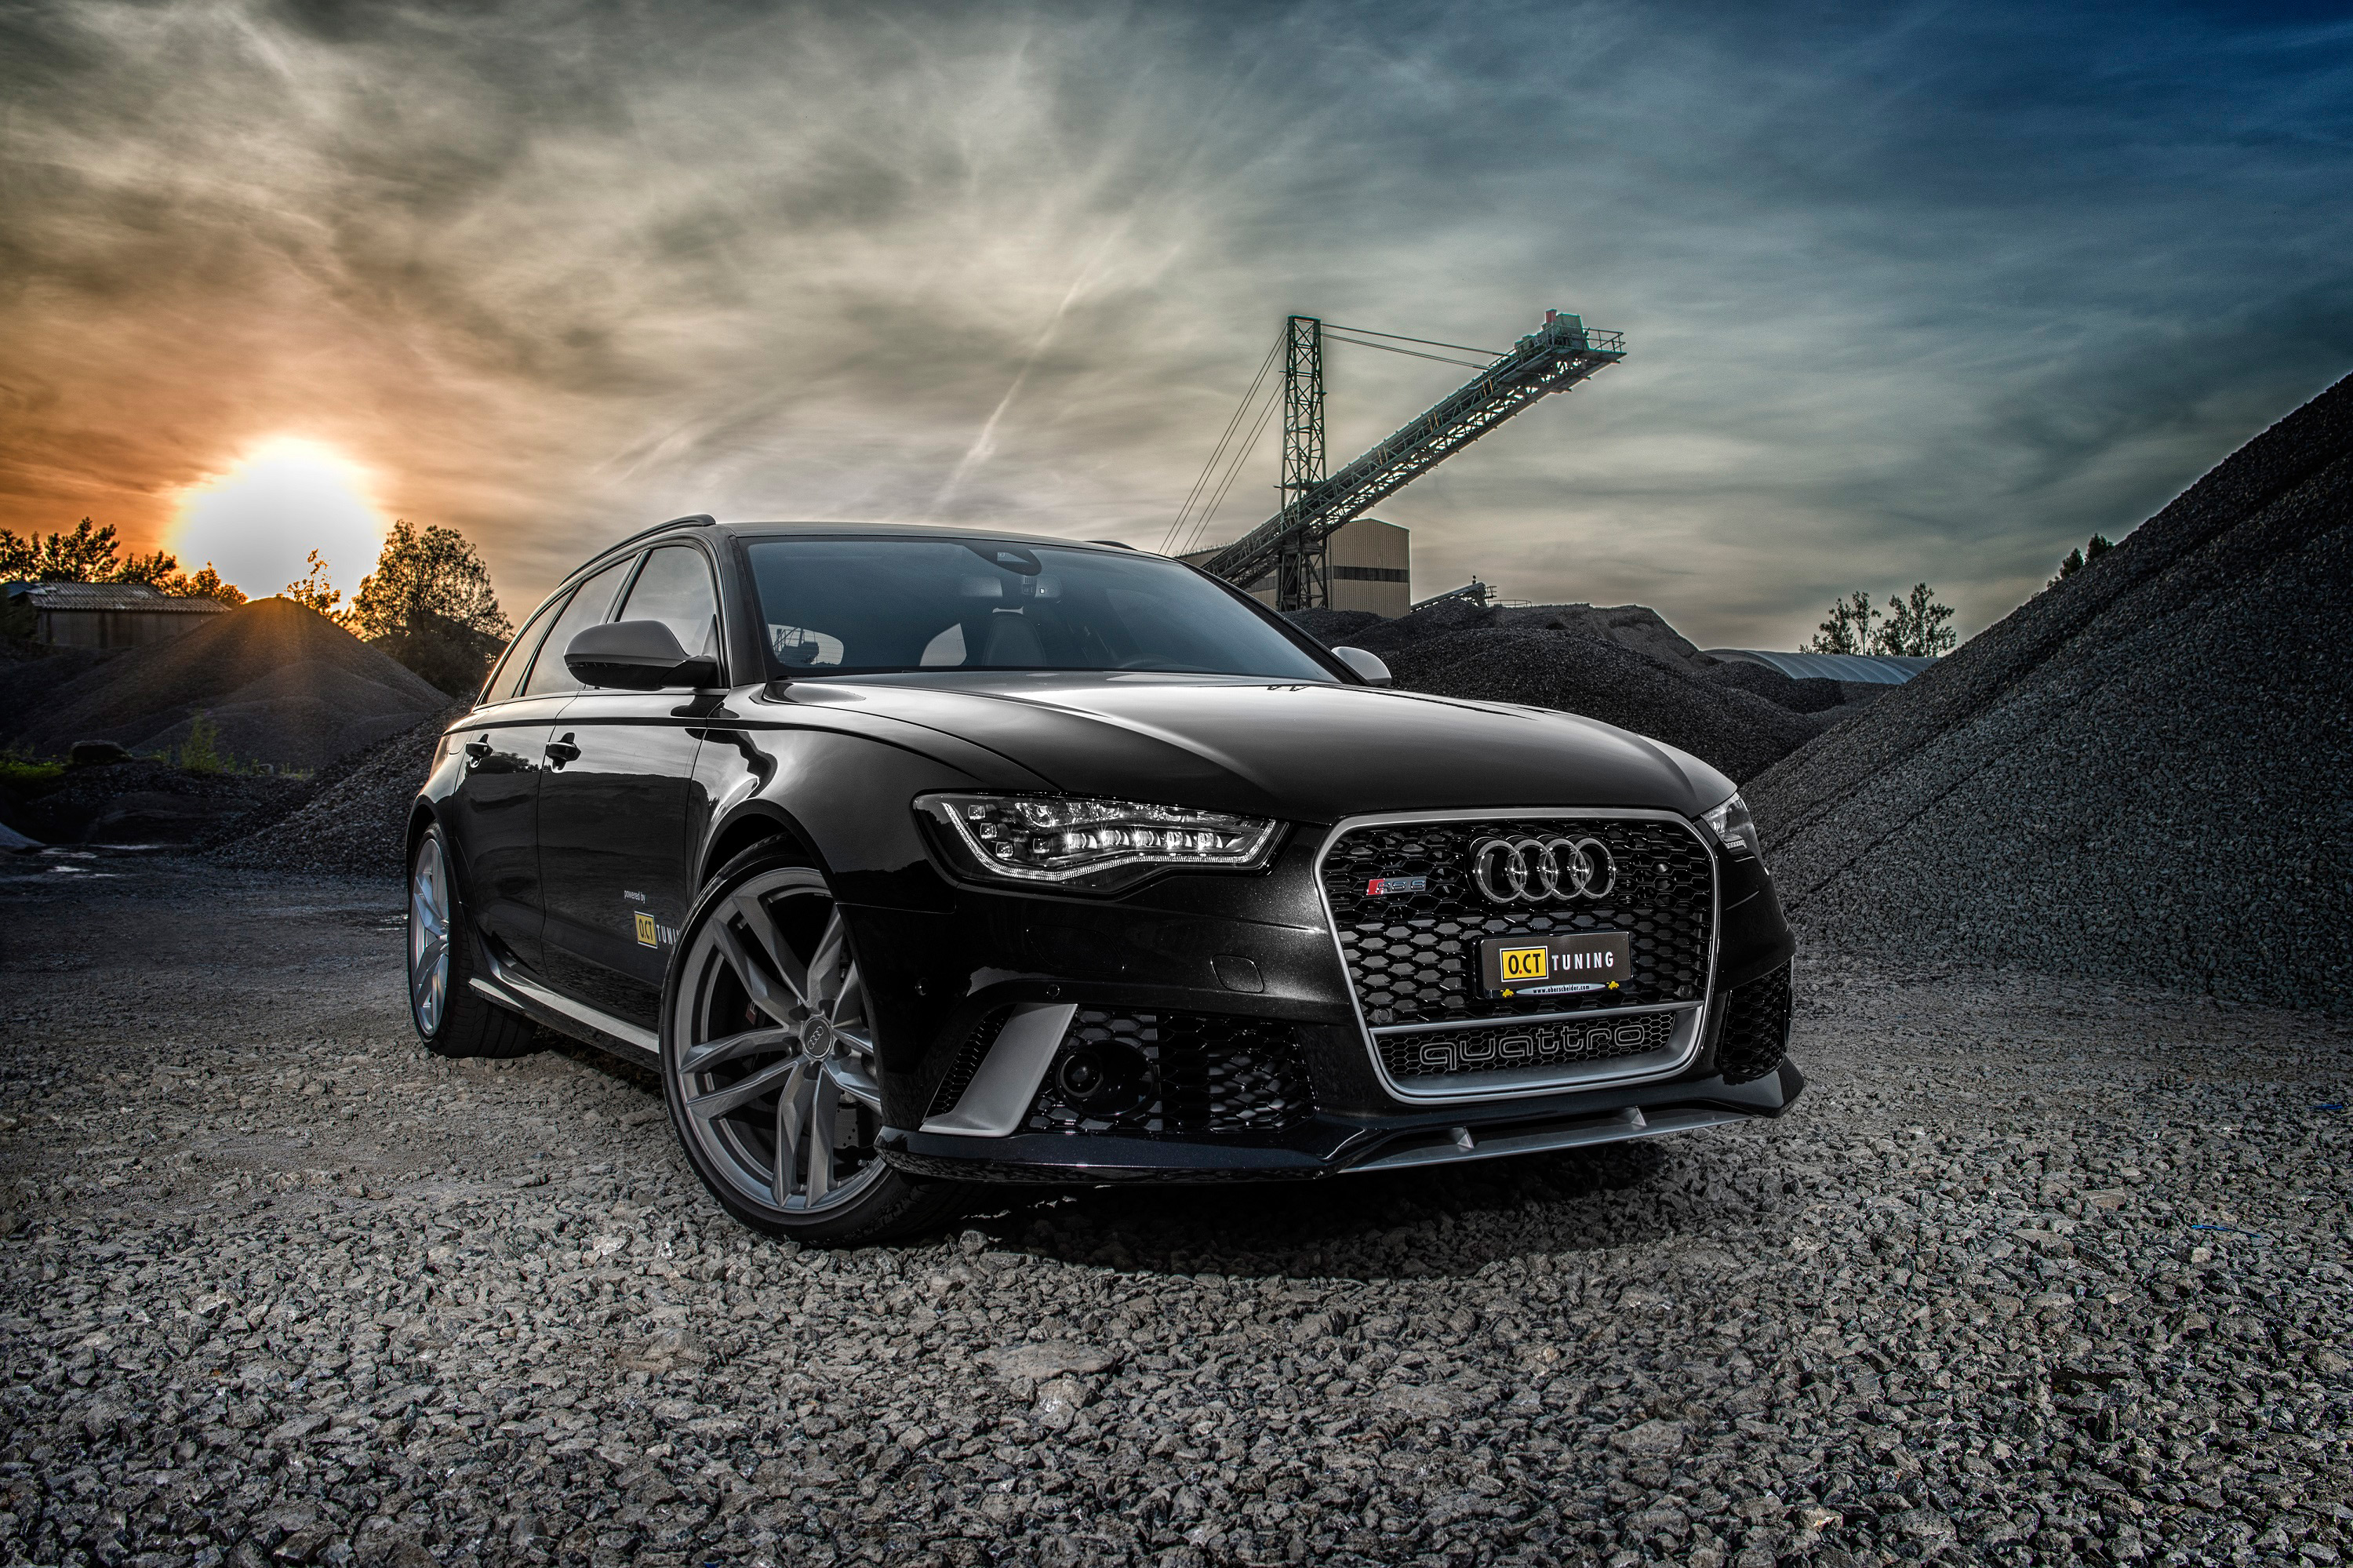 OCT Tuning Audi RS6